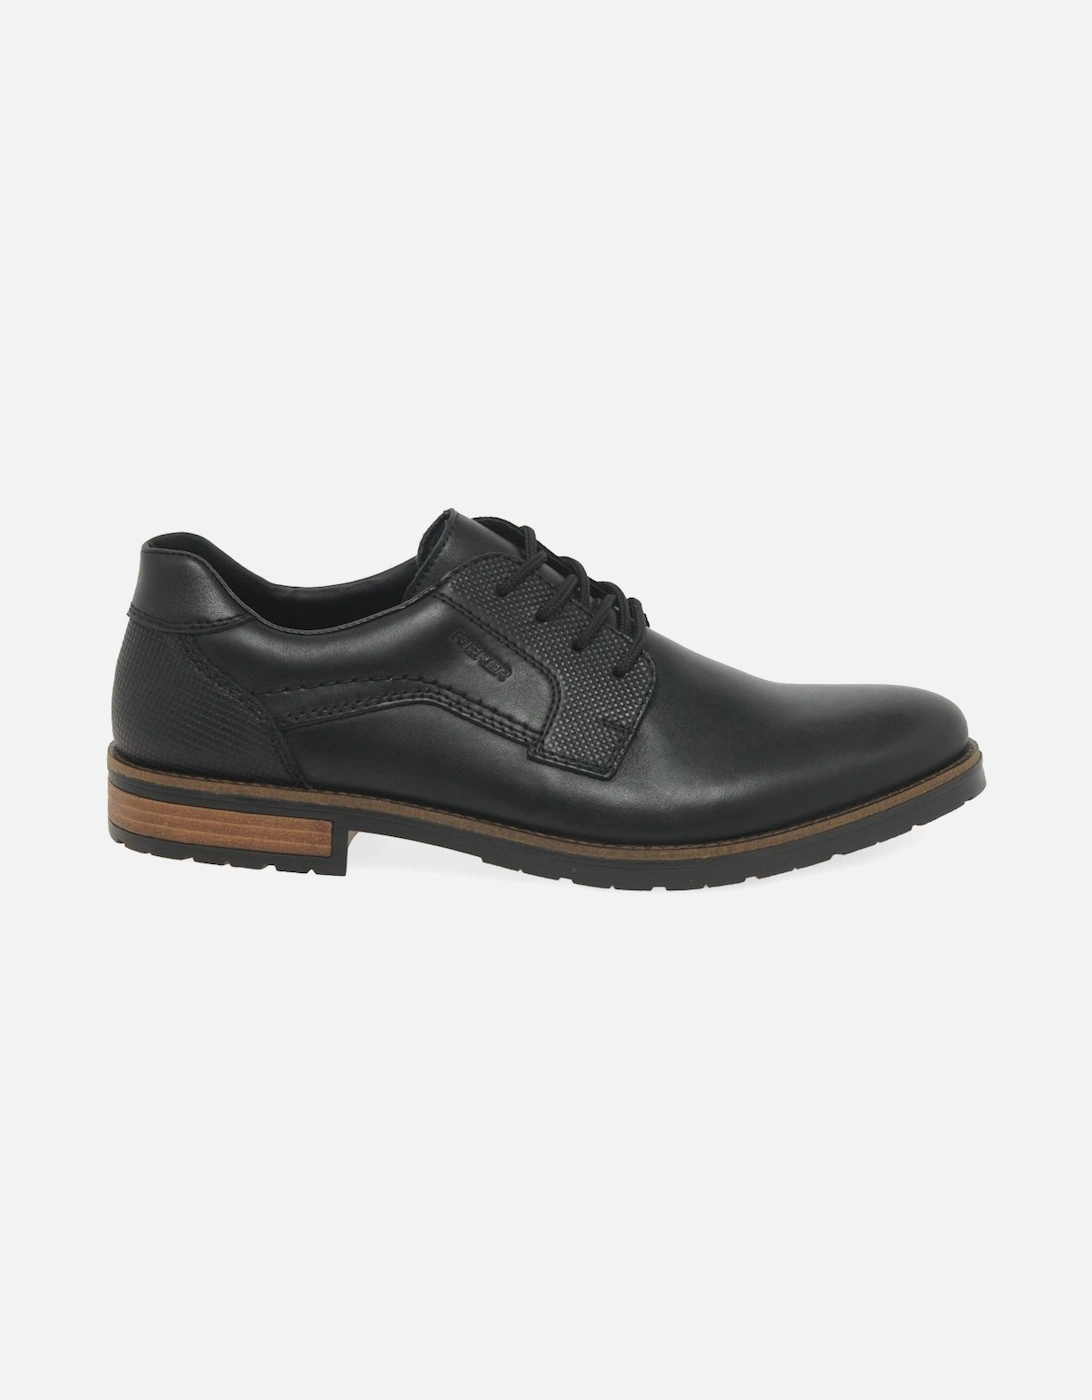 Riff Mens Formal Lace Up Shoes